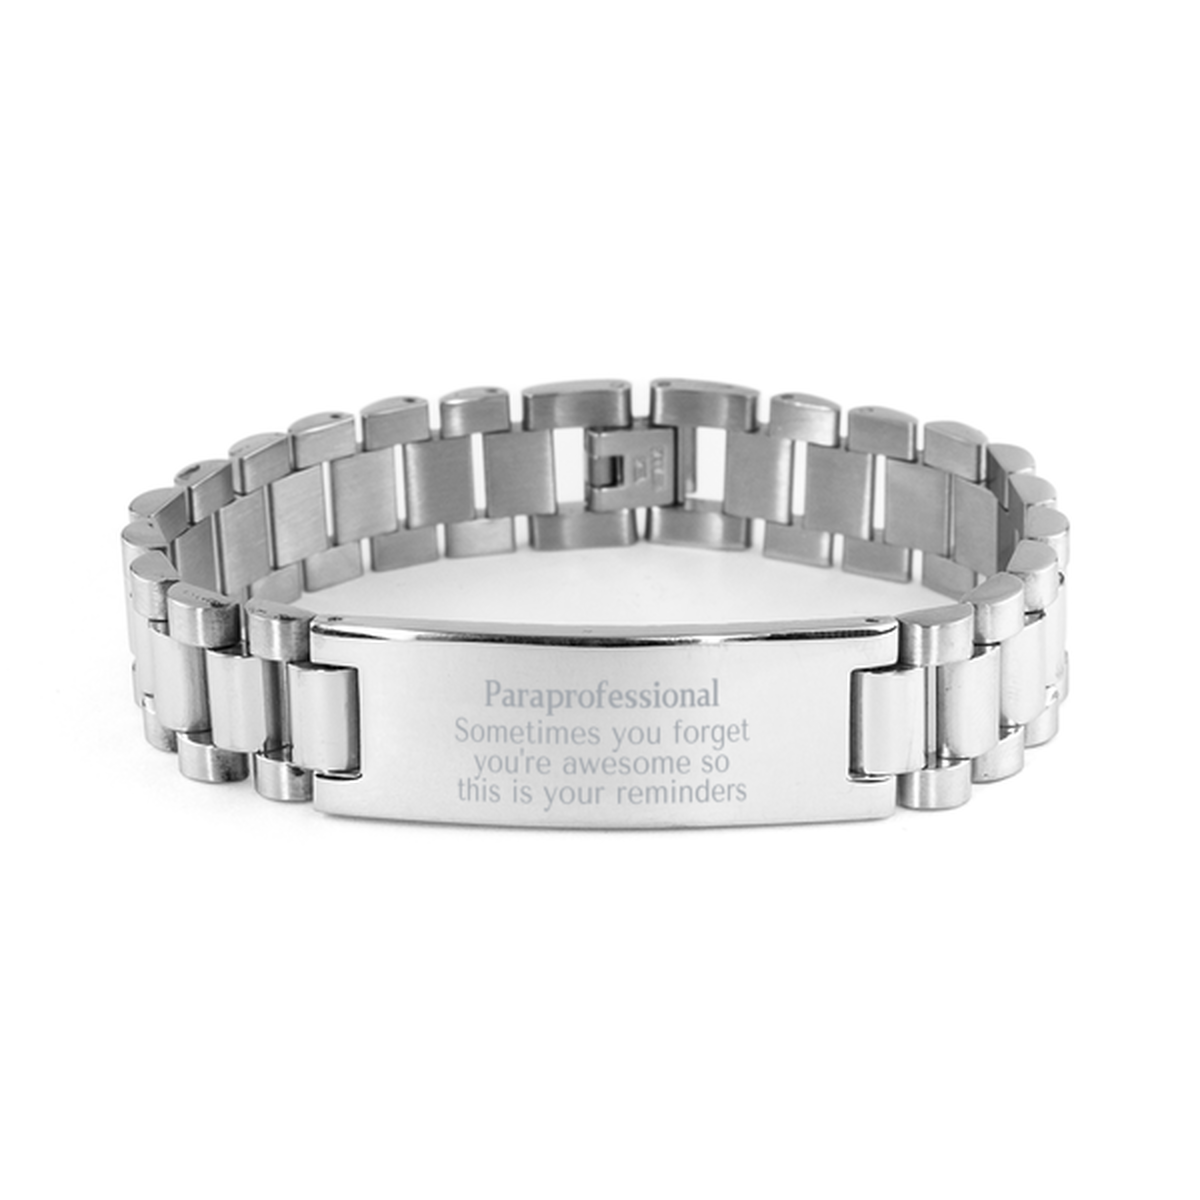 Sentimental Paraprofessional Ladder Stainless Steel Bracelet, Paraprofessional Sometimes you forget you're awesome so this is your reminders, Graduation Christmas Birthday Gifts for Paraprofessional, Men, Women, Coworkers